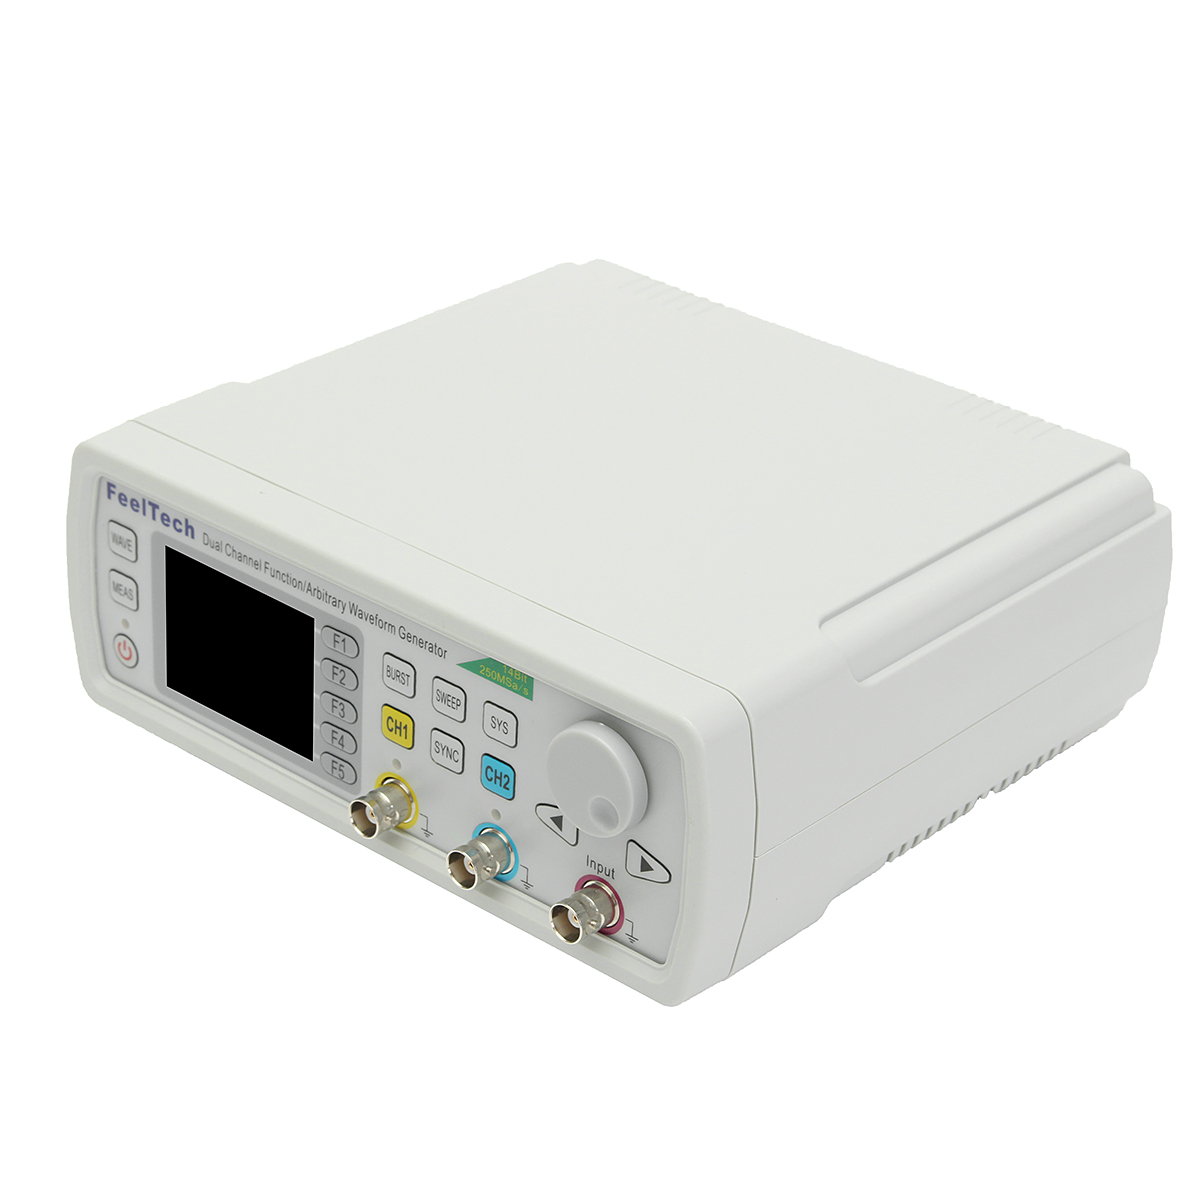 FY6600 Digital 12-60MHz Dual Channel DDS Function Arbitrary Waveform Signal Generator Frequency Meter 89